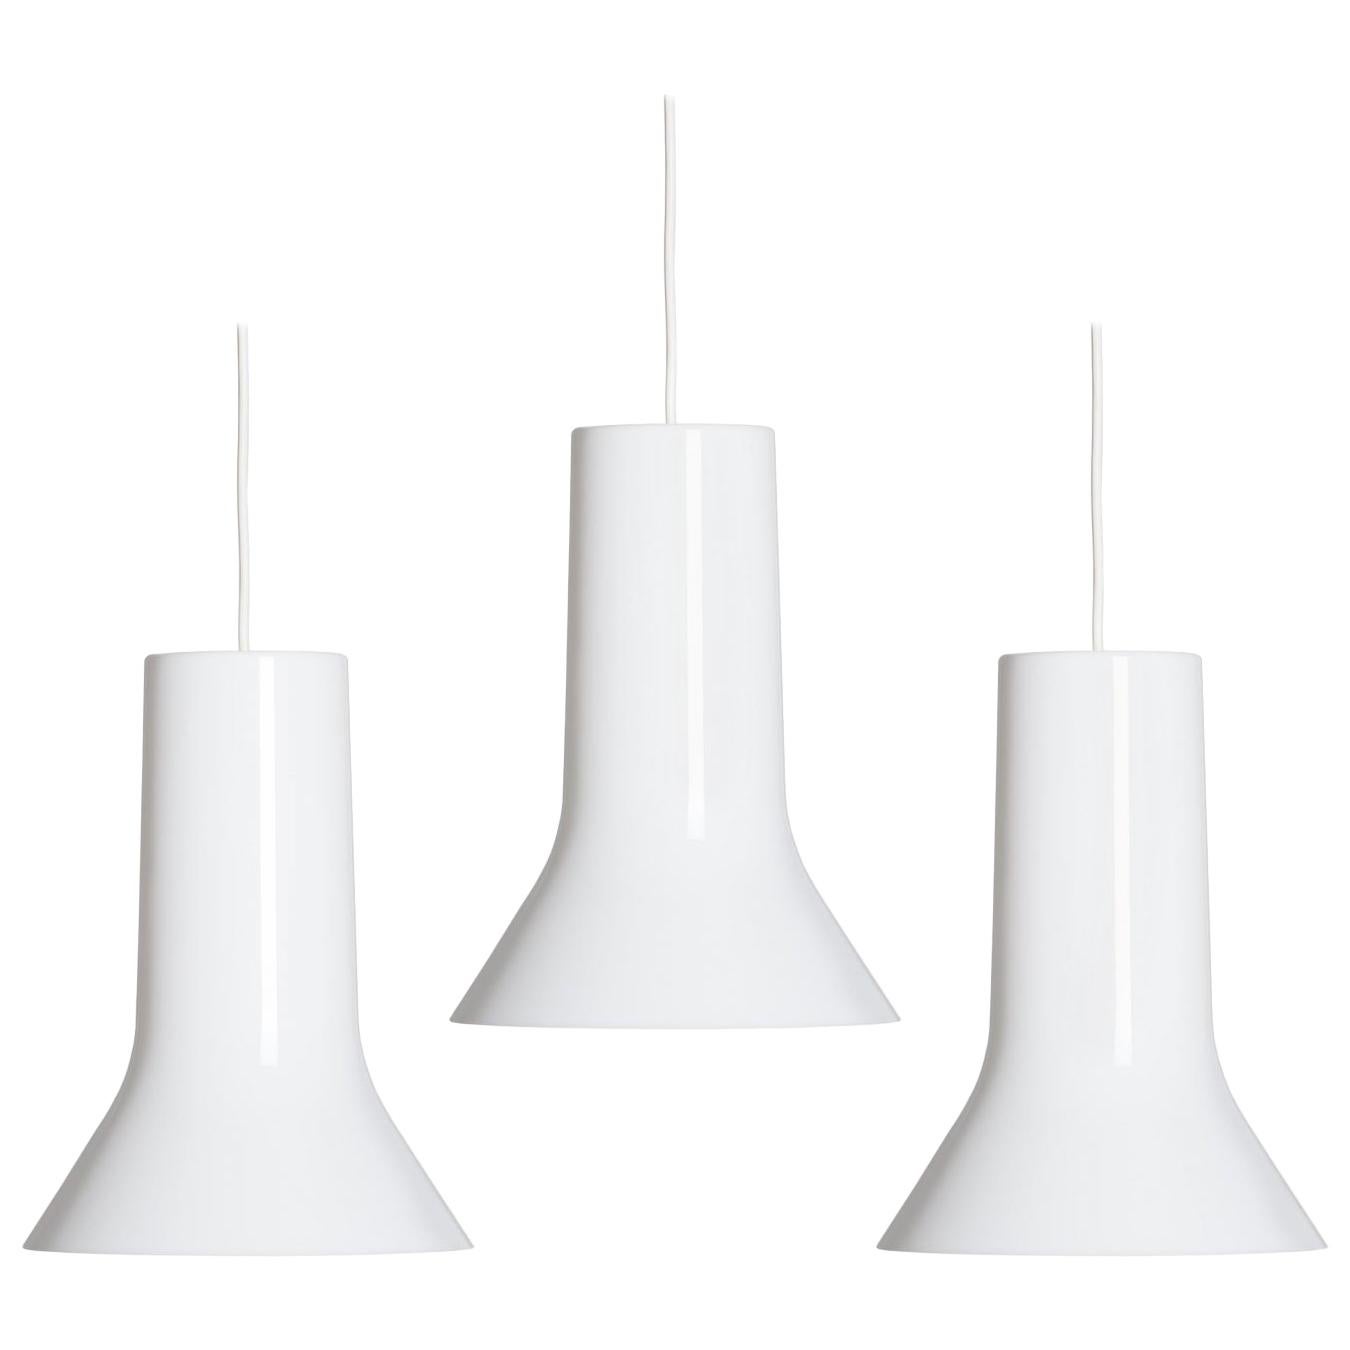 Pair of Eero Aarnio 'Vaasi' Pendants in White for Innolux Oy. Designed in 2011, Aarnio's iconic light consists of two acrylic shades of different colors, one nesting inside the other. Aarnio’s original concept of flower vases nesting inside each